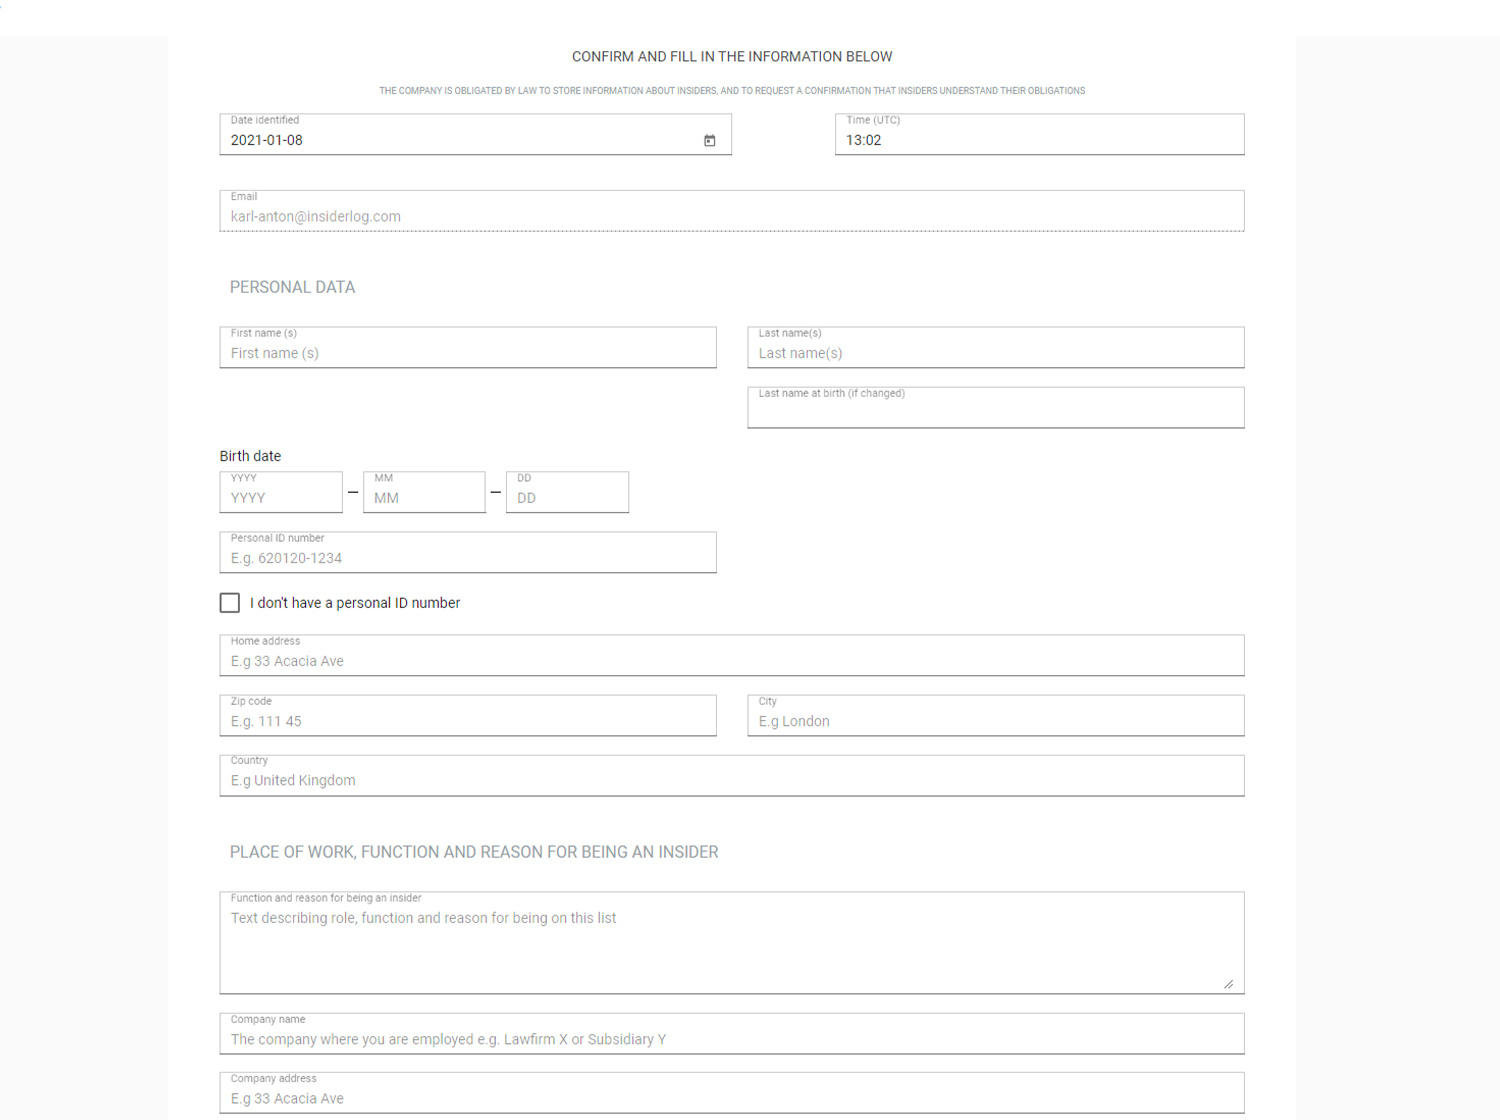 Intuitive web forms for insiders with pre-filled information when applicable